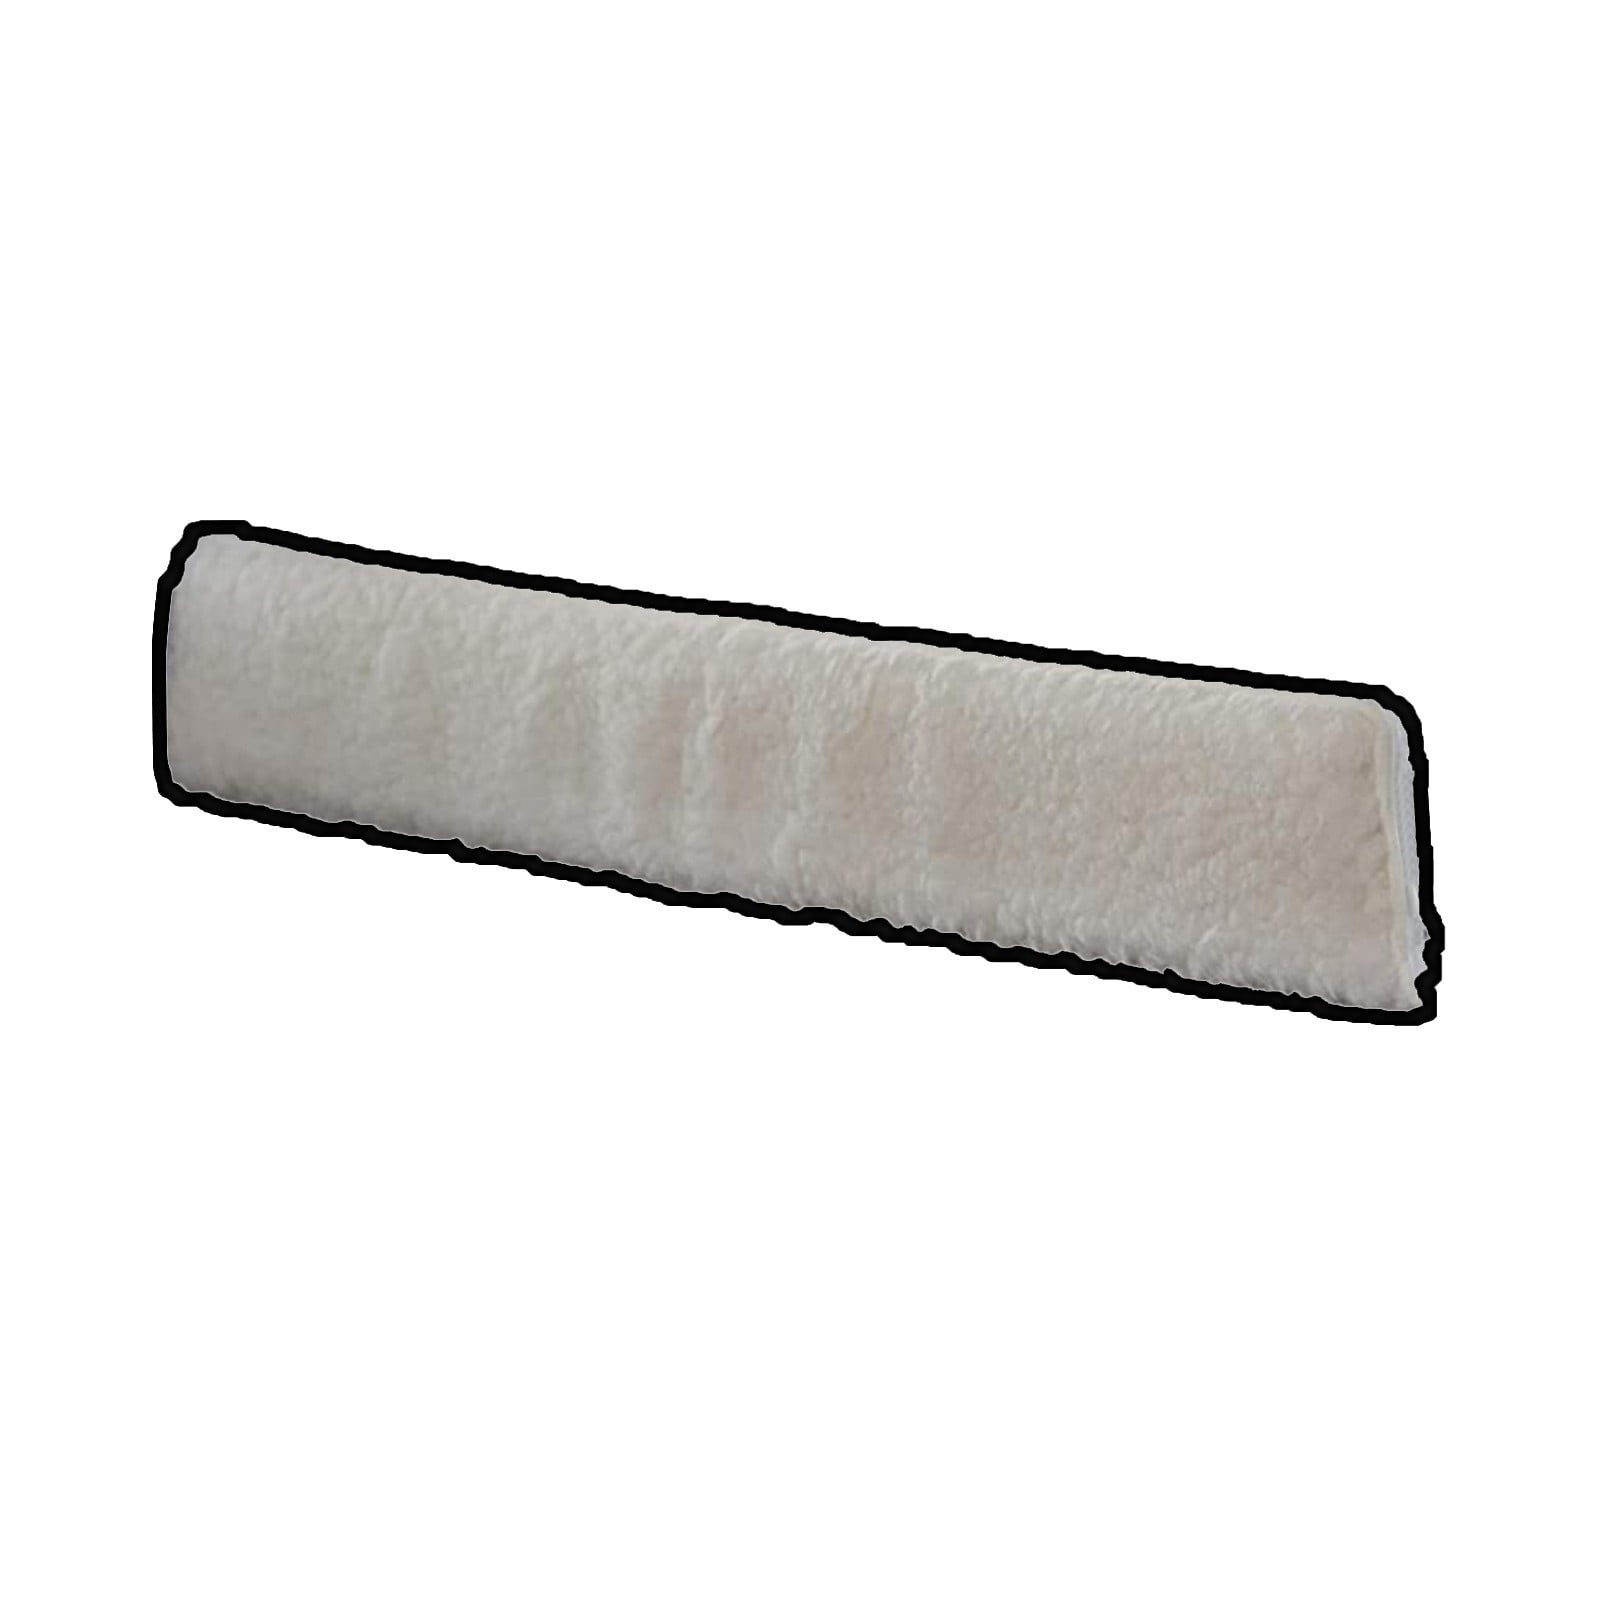 Details about   Winter Warm And Cold Imitation Wool Door Seam Stickers TheCrack Of The Door 